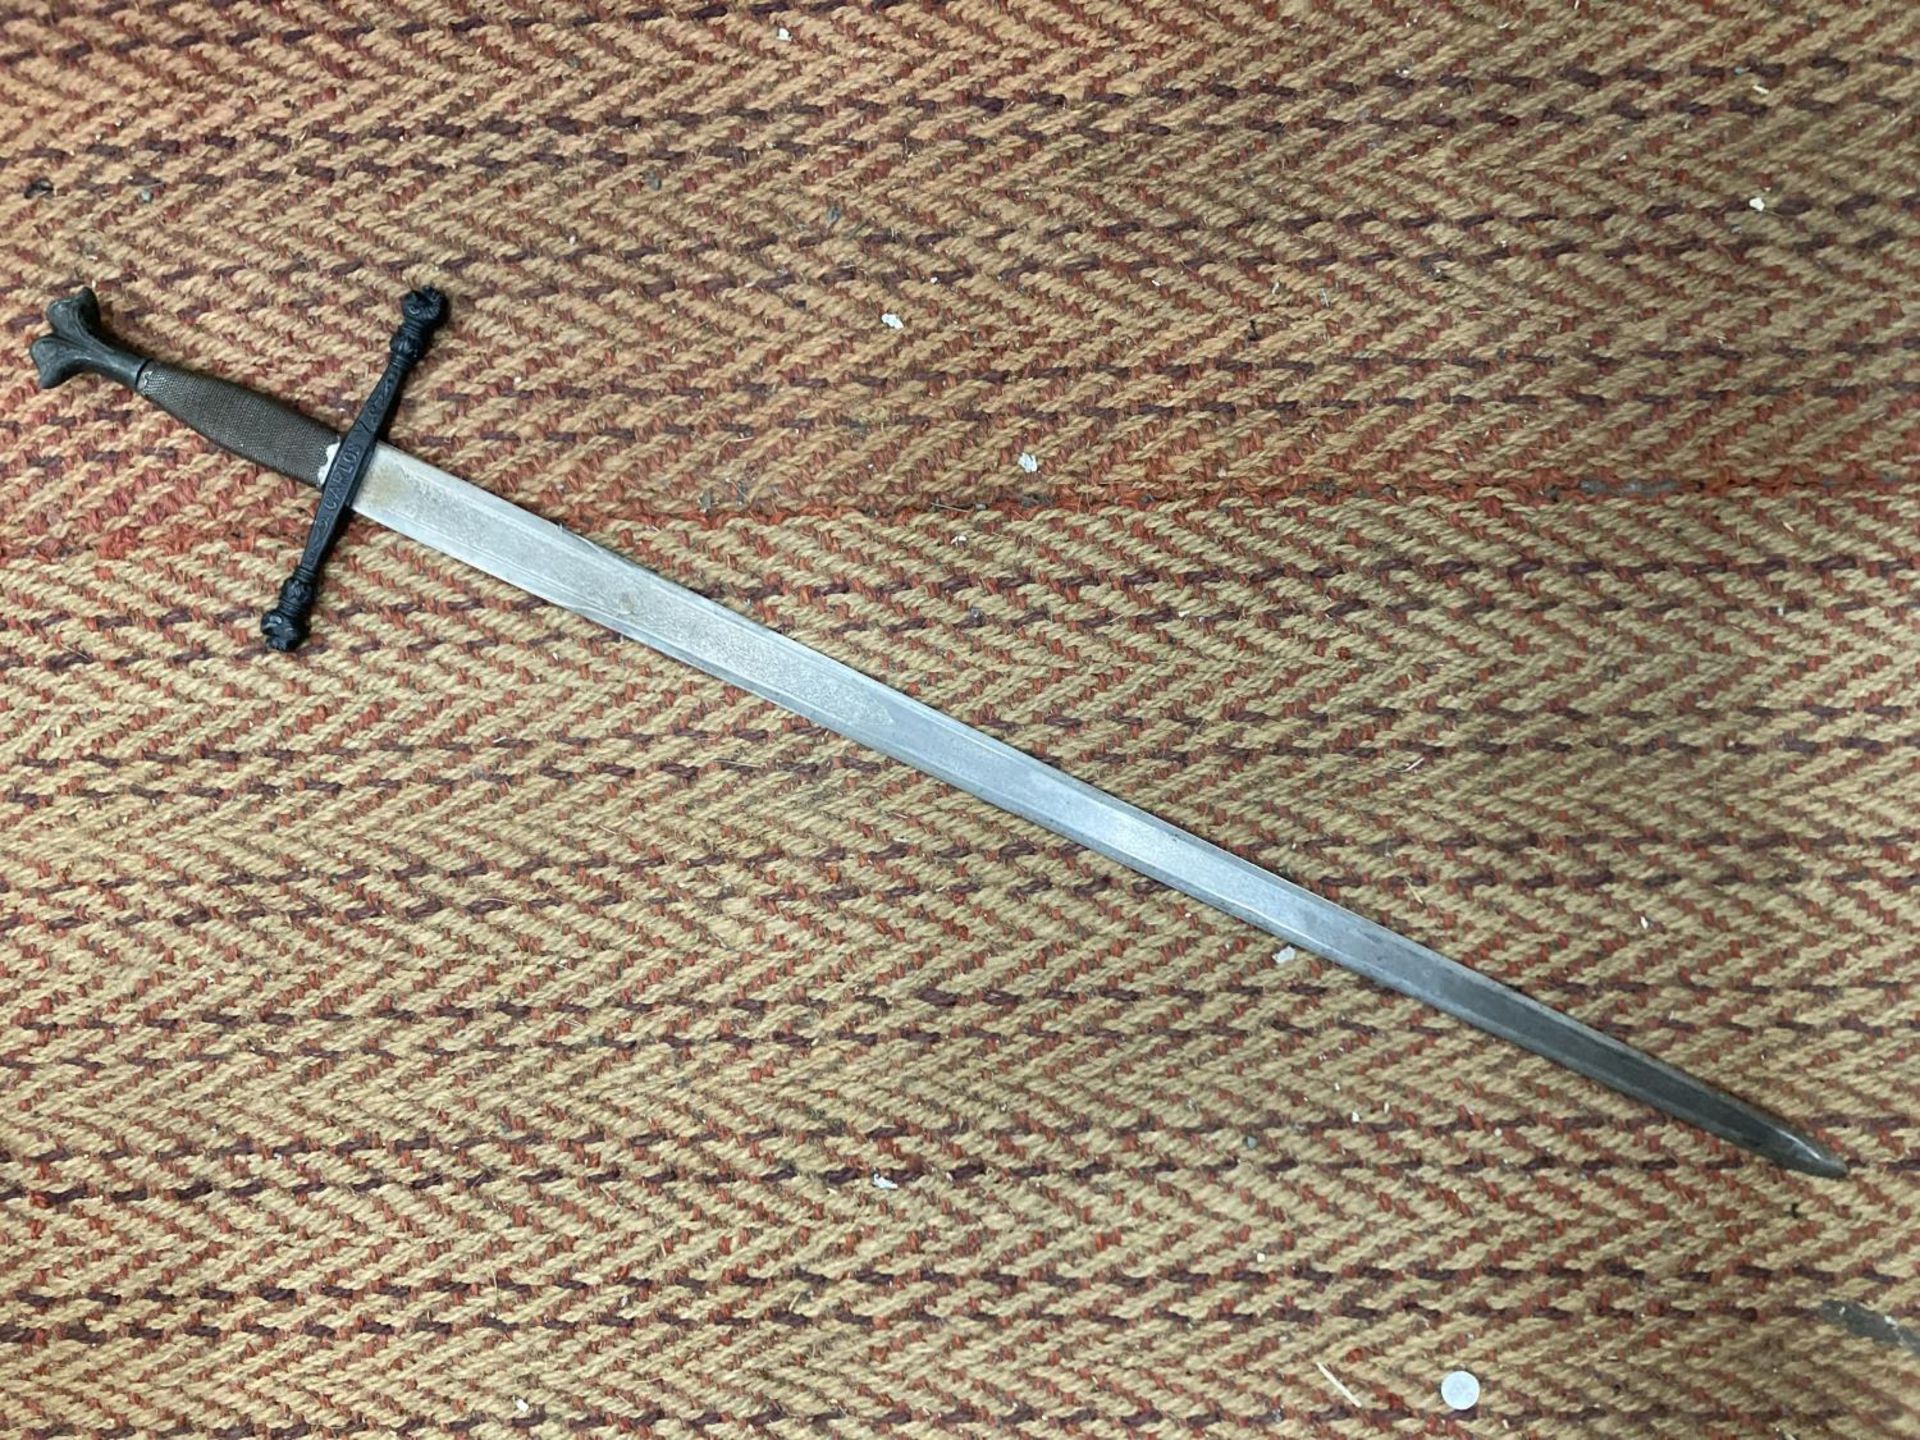 A KING CARLOS V HEAVY LONG SWORD WITH ORNATE BLADE OF TOLEDO STEEL - APPROXIMATELY 104CM